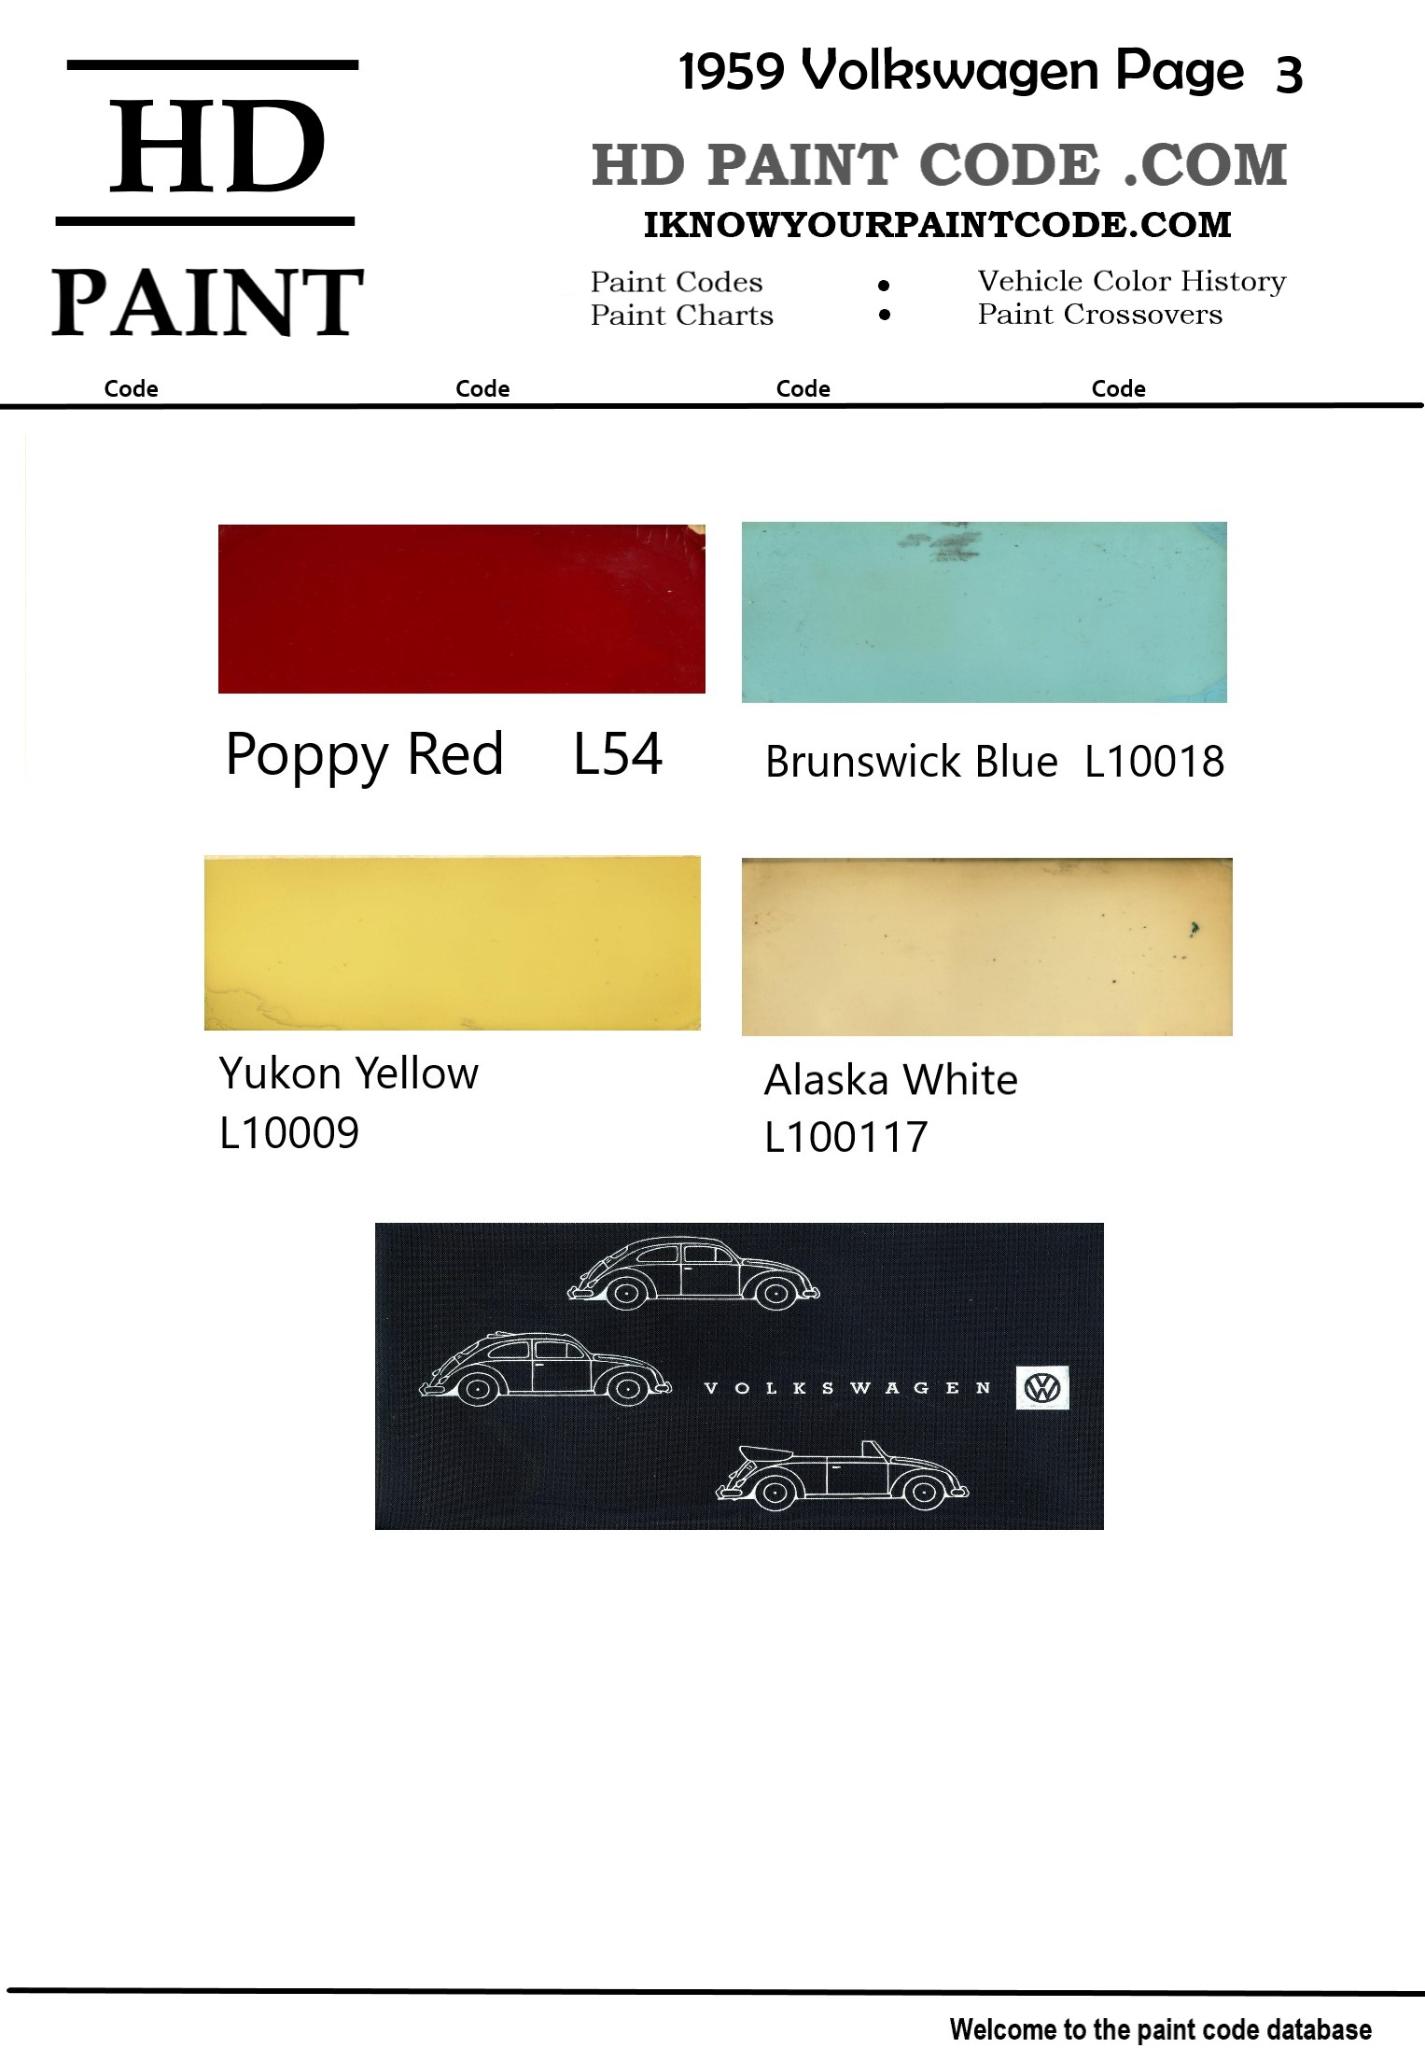  1959 Volkswagen Interior and Exterior Colors and codes